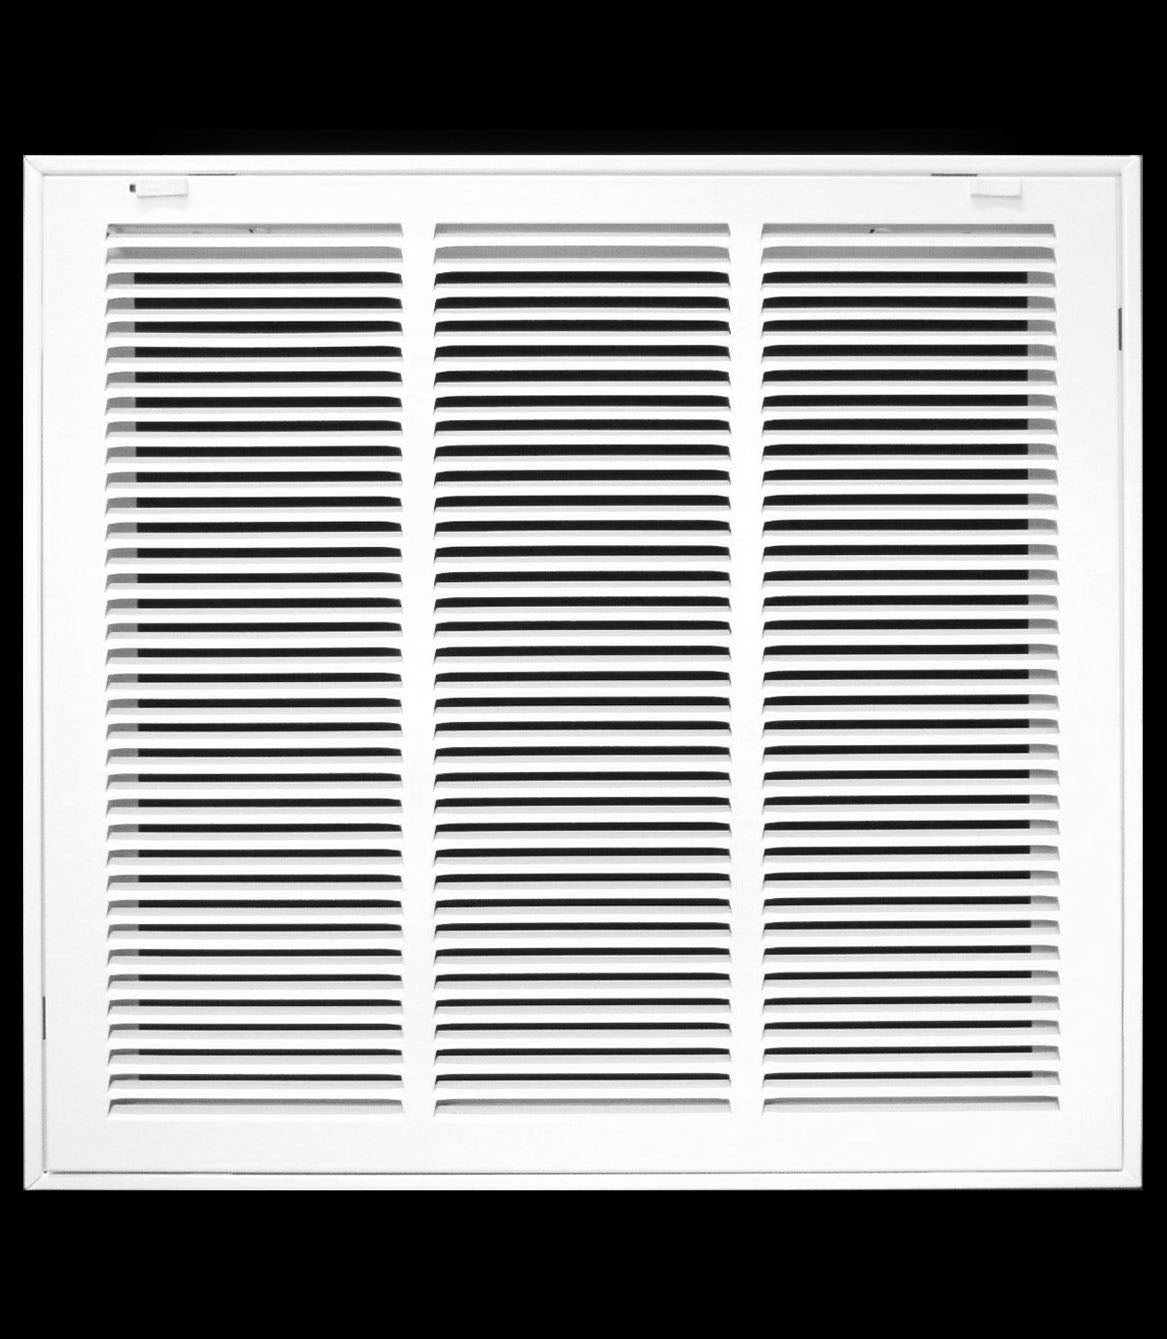 18&quot; X 16&quot; Steel Return Air Filter Grille for 1&quot; Filter - Removable Frame - [Outer Dimensions: 20 5/8&quot; X 18 5/8&quot;]